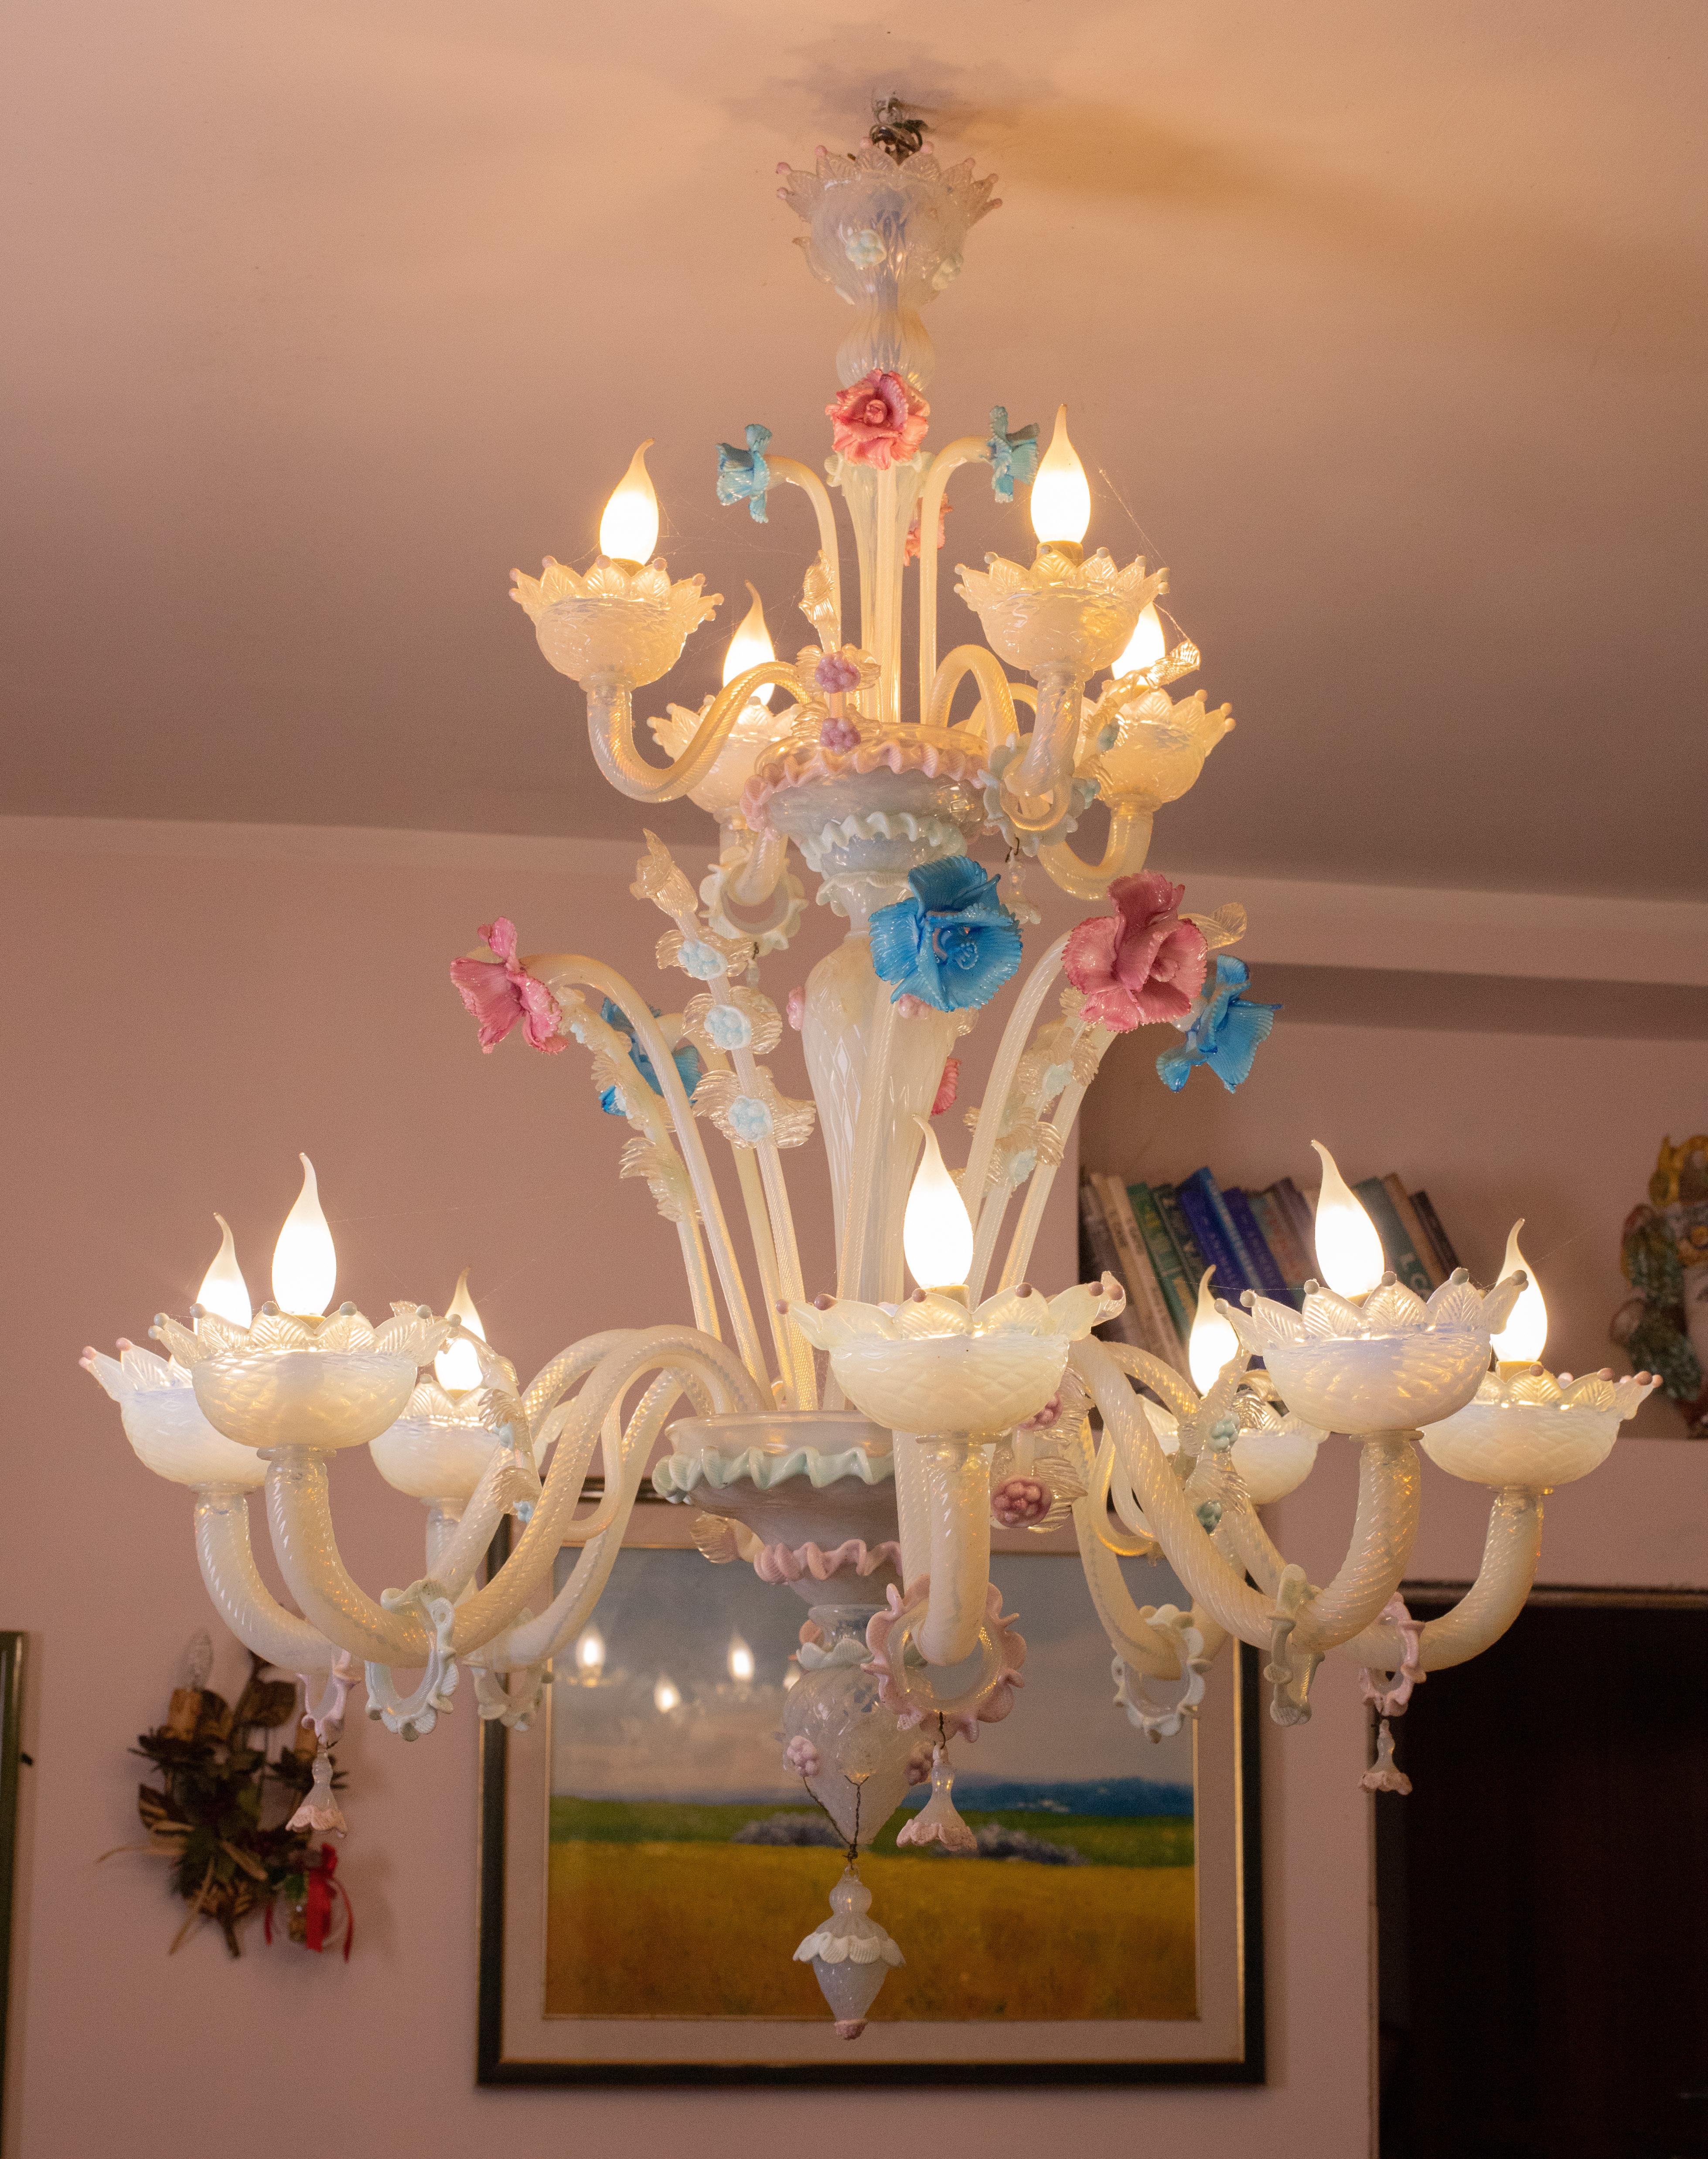 Wonderful murano chandelier opaline color formed by 12 arms with 12 points of light.

The chandelier is rich in decorations, consisting of 12 beautiful pink and blue flowers.

The chandelier is preferably suitable for large spaces such as living